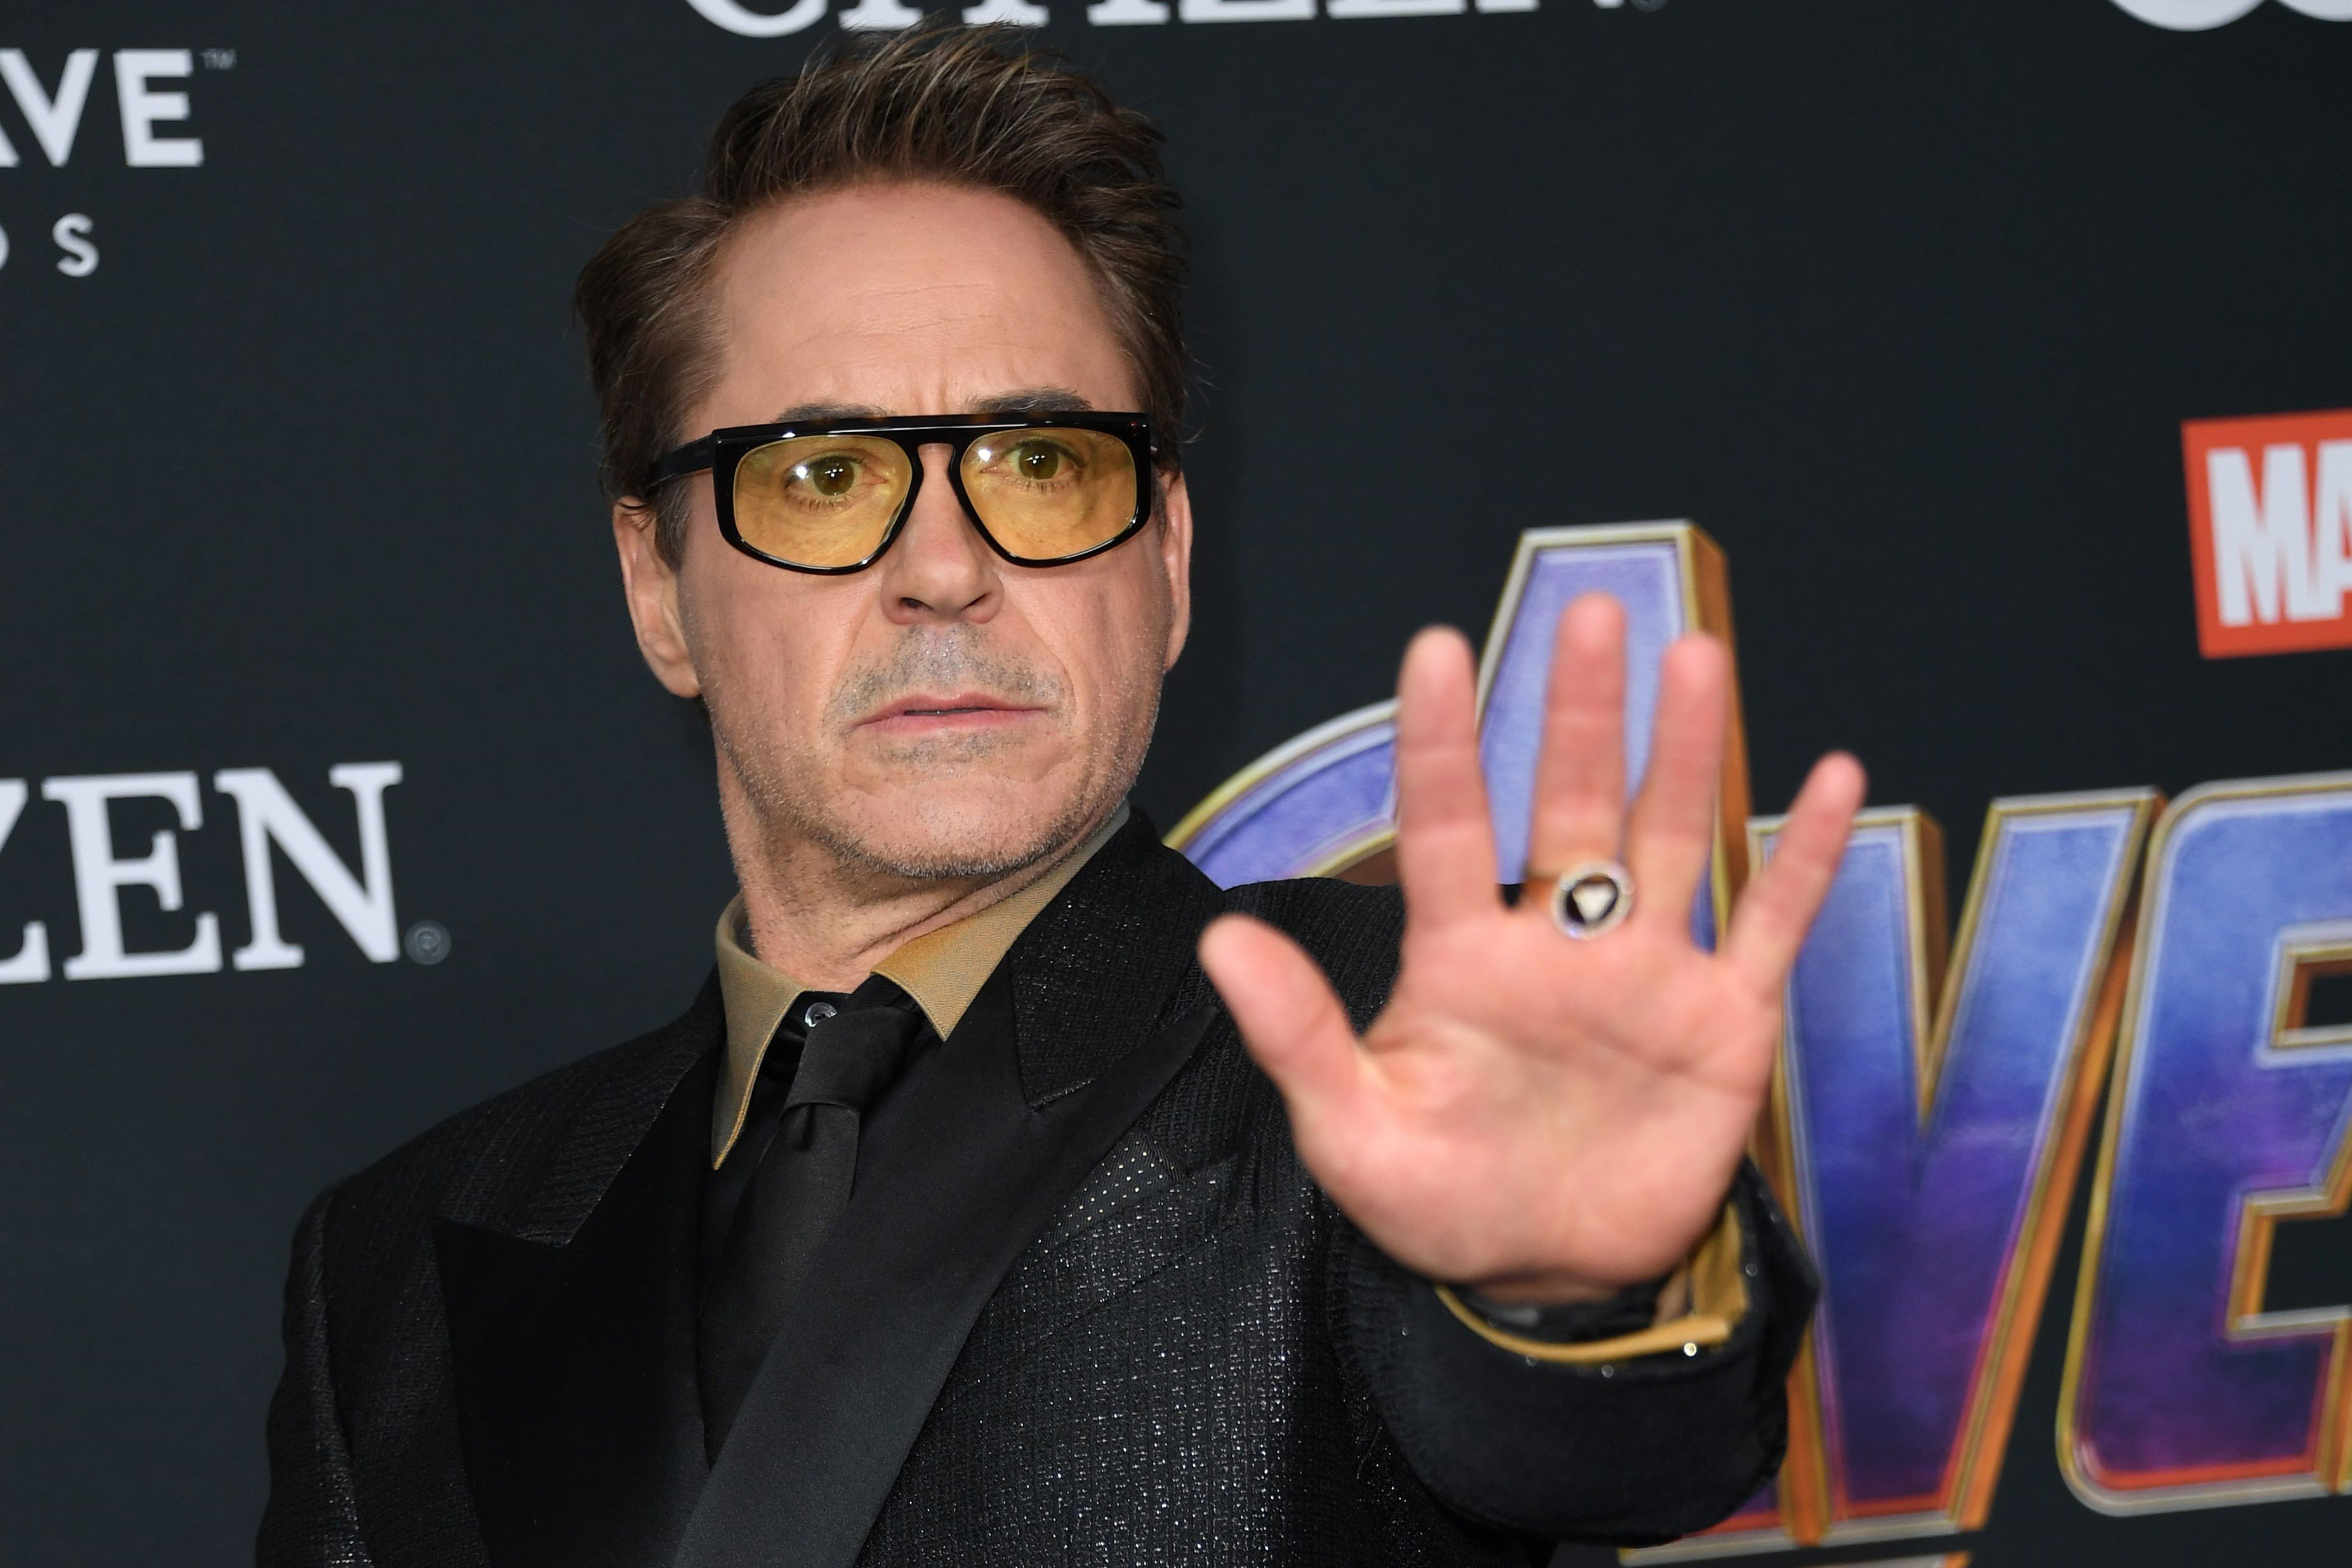 Robert Downey Jr., who played Iron Man in 'Avengers: Endgame,' holds his arm in front of him with his palm facing the camera. The actor wears a black suit over a gold and black button-up shirt and black tie, and yellow-tinted glasses.